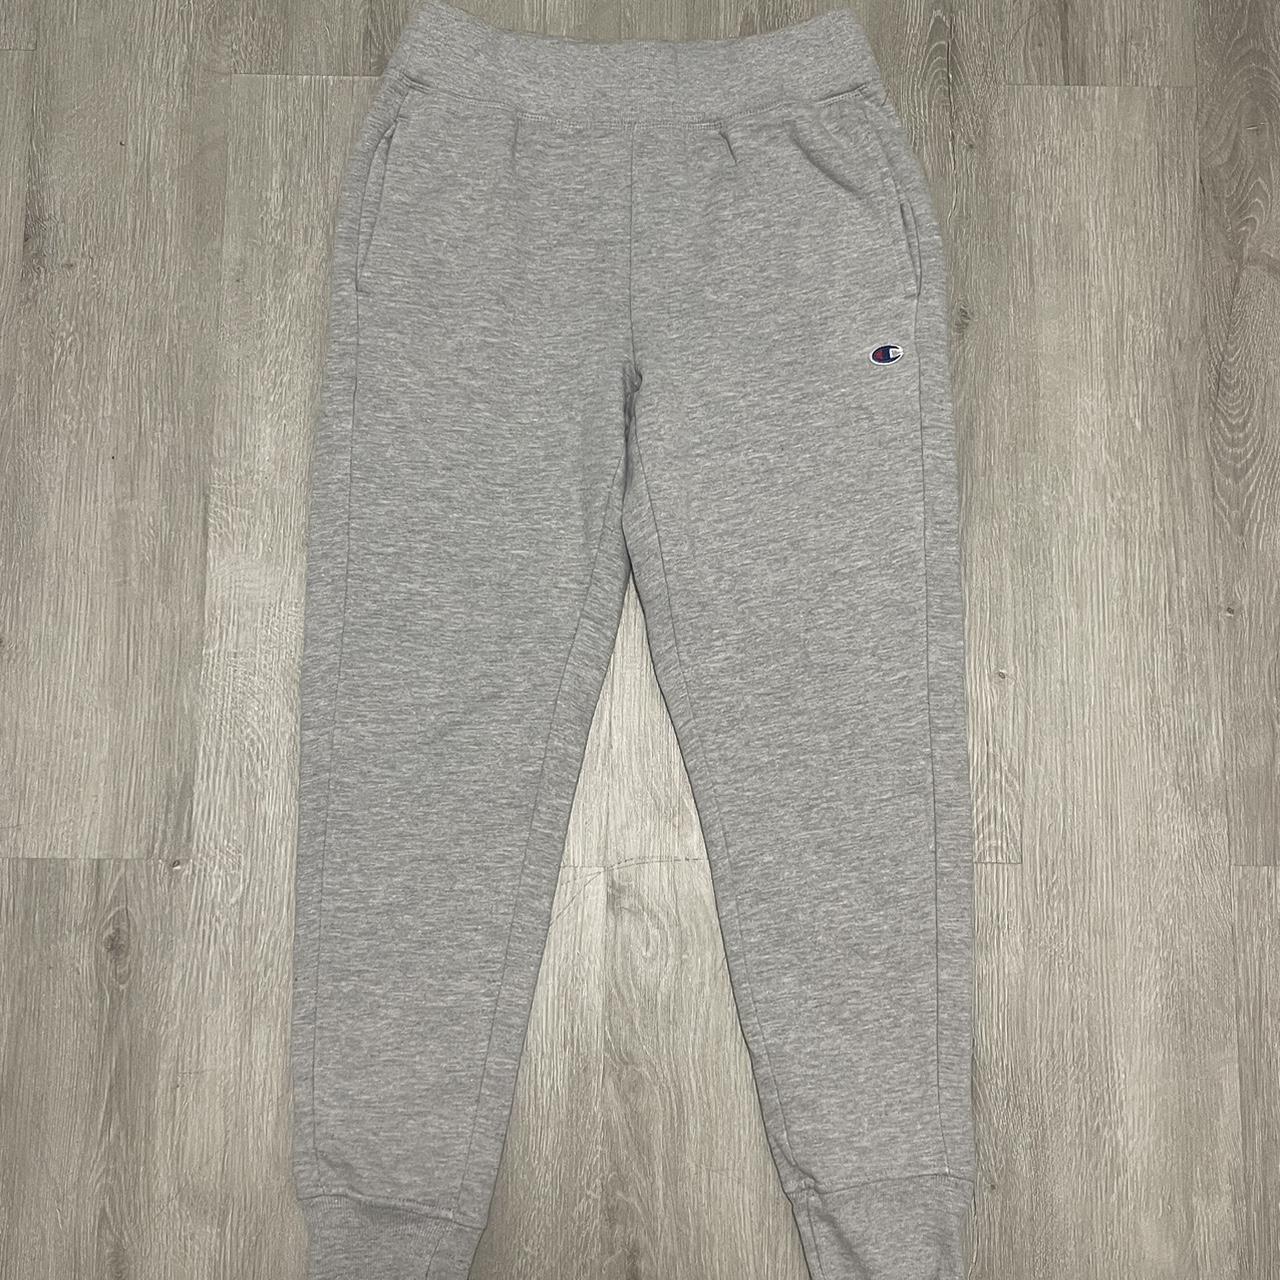 Champion Grey Sweatpants -Bought these and never... - Depop